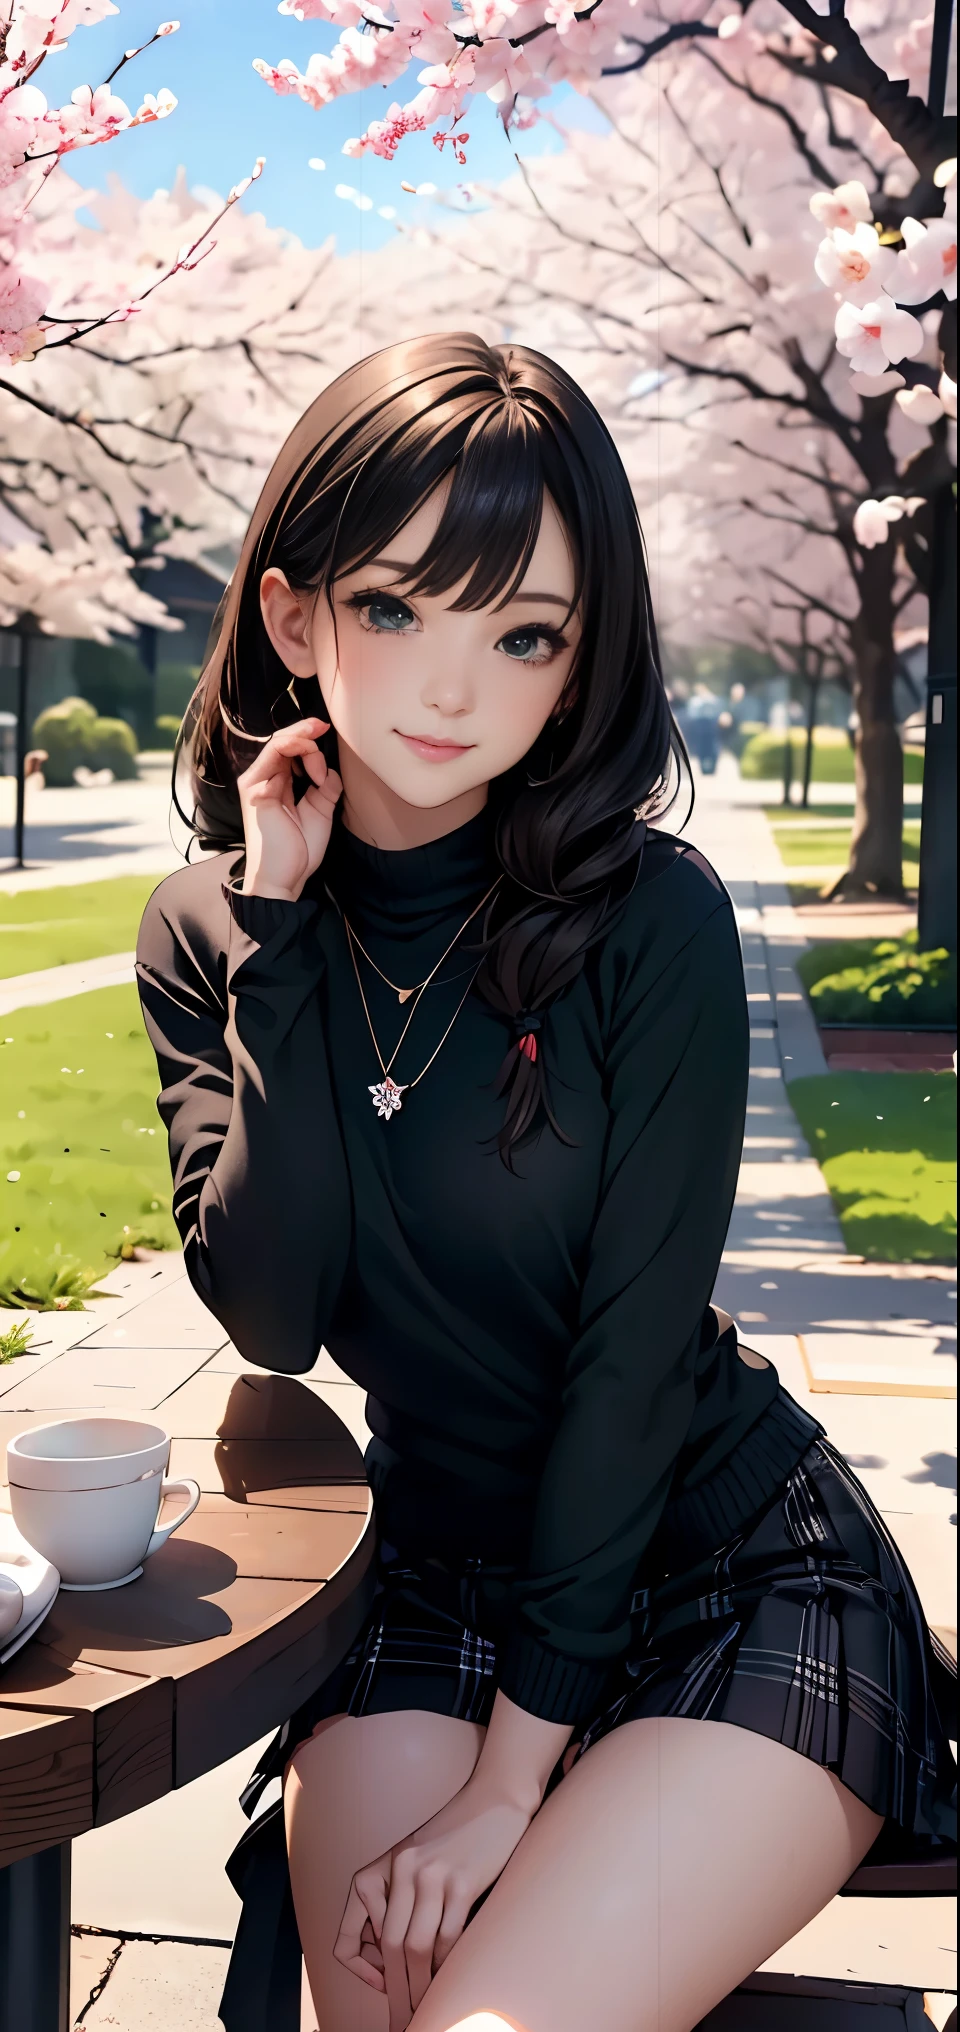 ((table top, highest quality, High resolution, nffsw, perfect pixel, Depth of written boundary, 4k, nffsw, nffsw))), 1 girl, single, alone, beautiful anime girl, beautiful art style, anime character, ((long hair, bangs, brown hair)), ((green eyes:1.4, round eyes, beautiful eyelashes, realistic eyes)), ((detailed face, blush:1.2)), ((smooth texture:0.75, realistic texture:0.65, realistic:1.1, Anime CG style)),  dynamic angle, ((black sweater, long sleeve, black skirt, plaid skirt, Snazzy, 1 diamond necklace)), smile,  amusement park, ((cherry blossoms, cherry blossomsの花が散る))